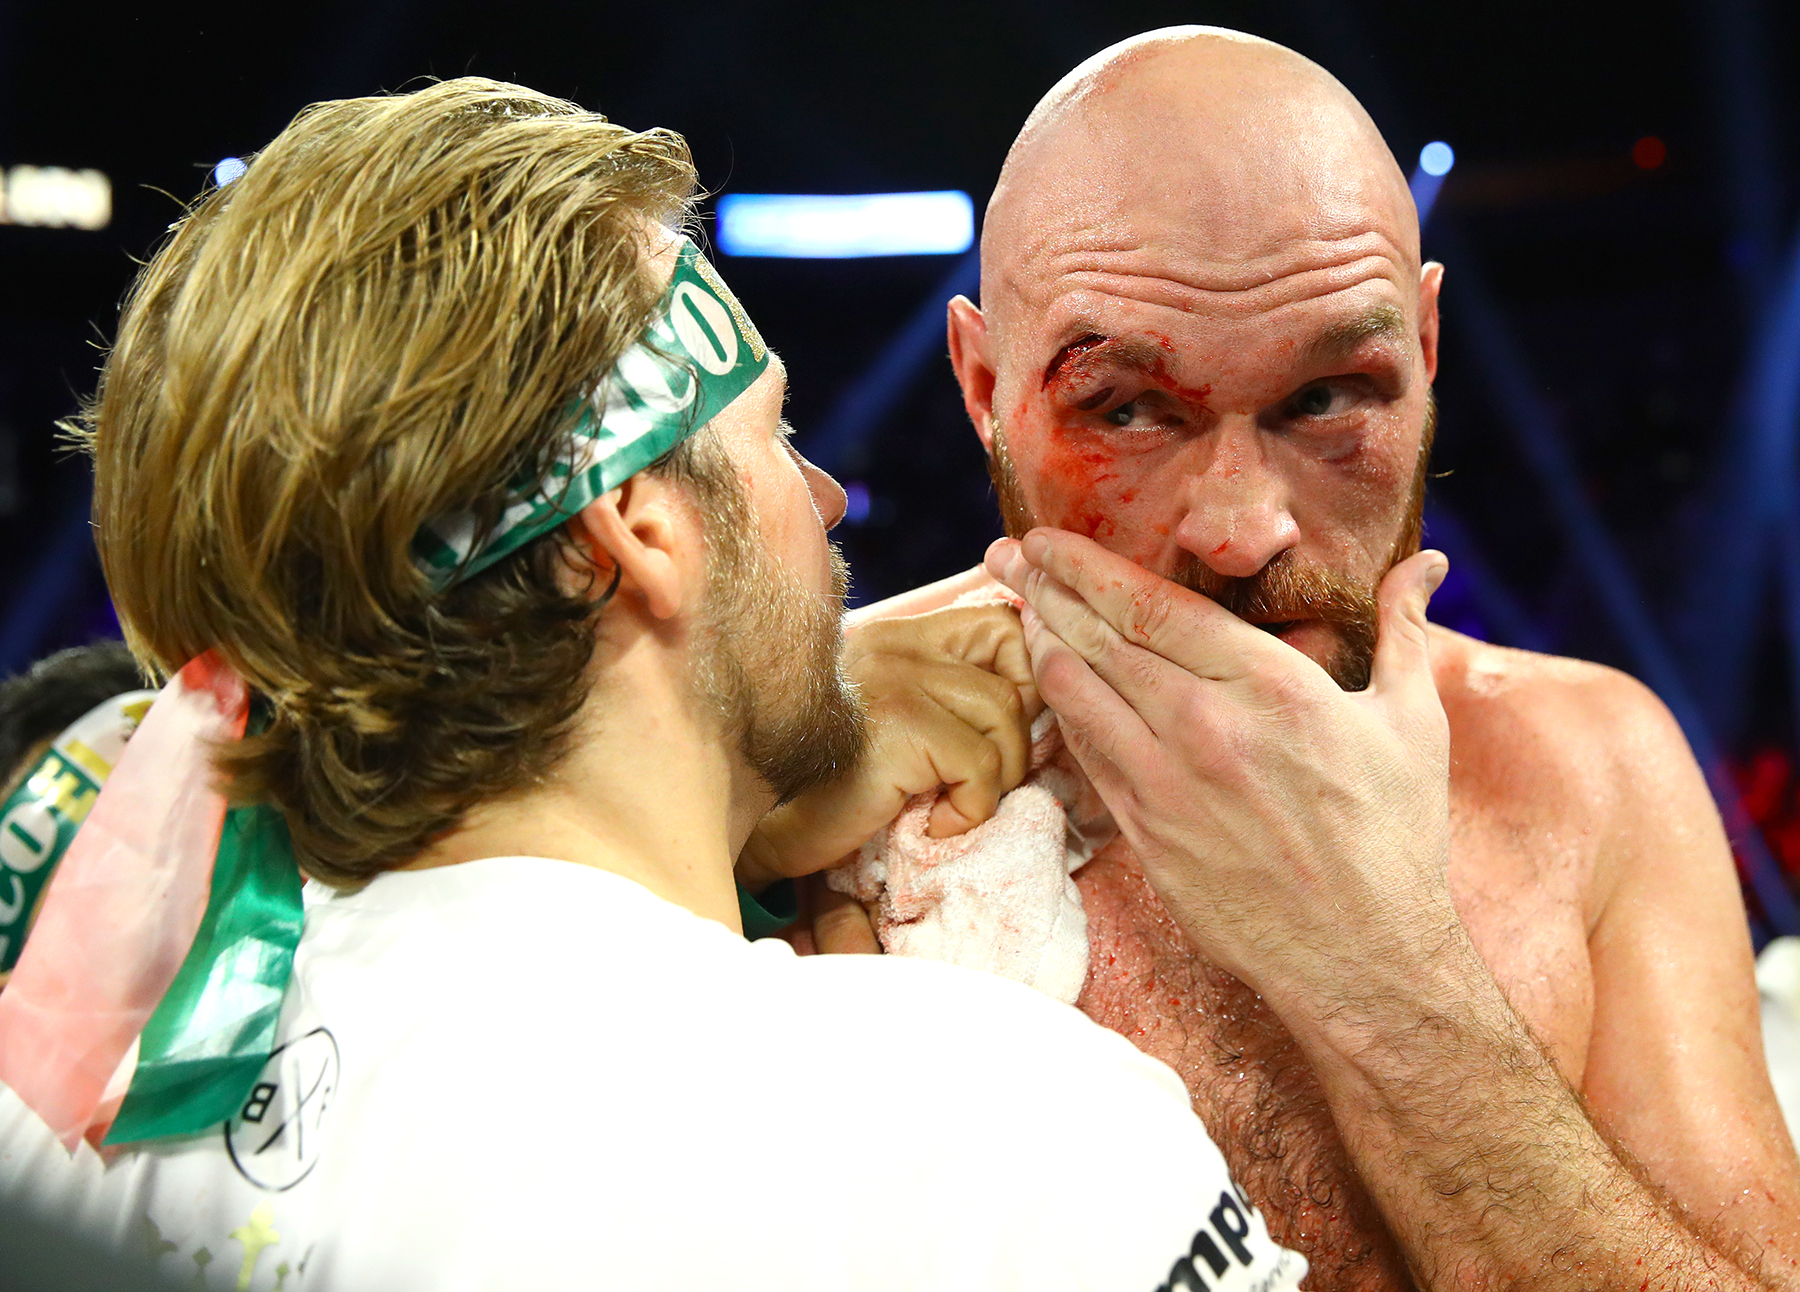 Tyson Fury and trainer Ben Davison split amicably, Fury now working with  Sugar Hill - The Ring